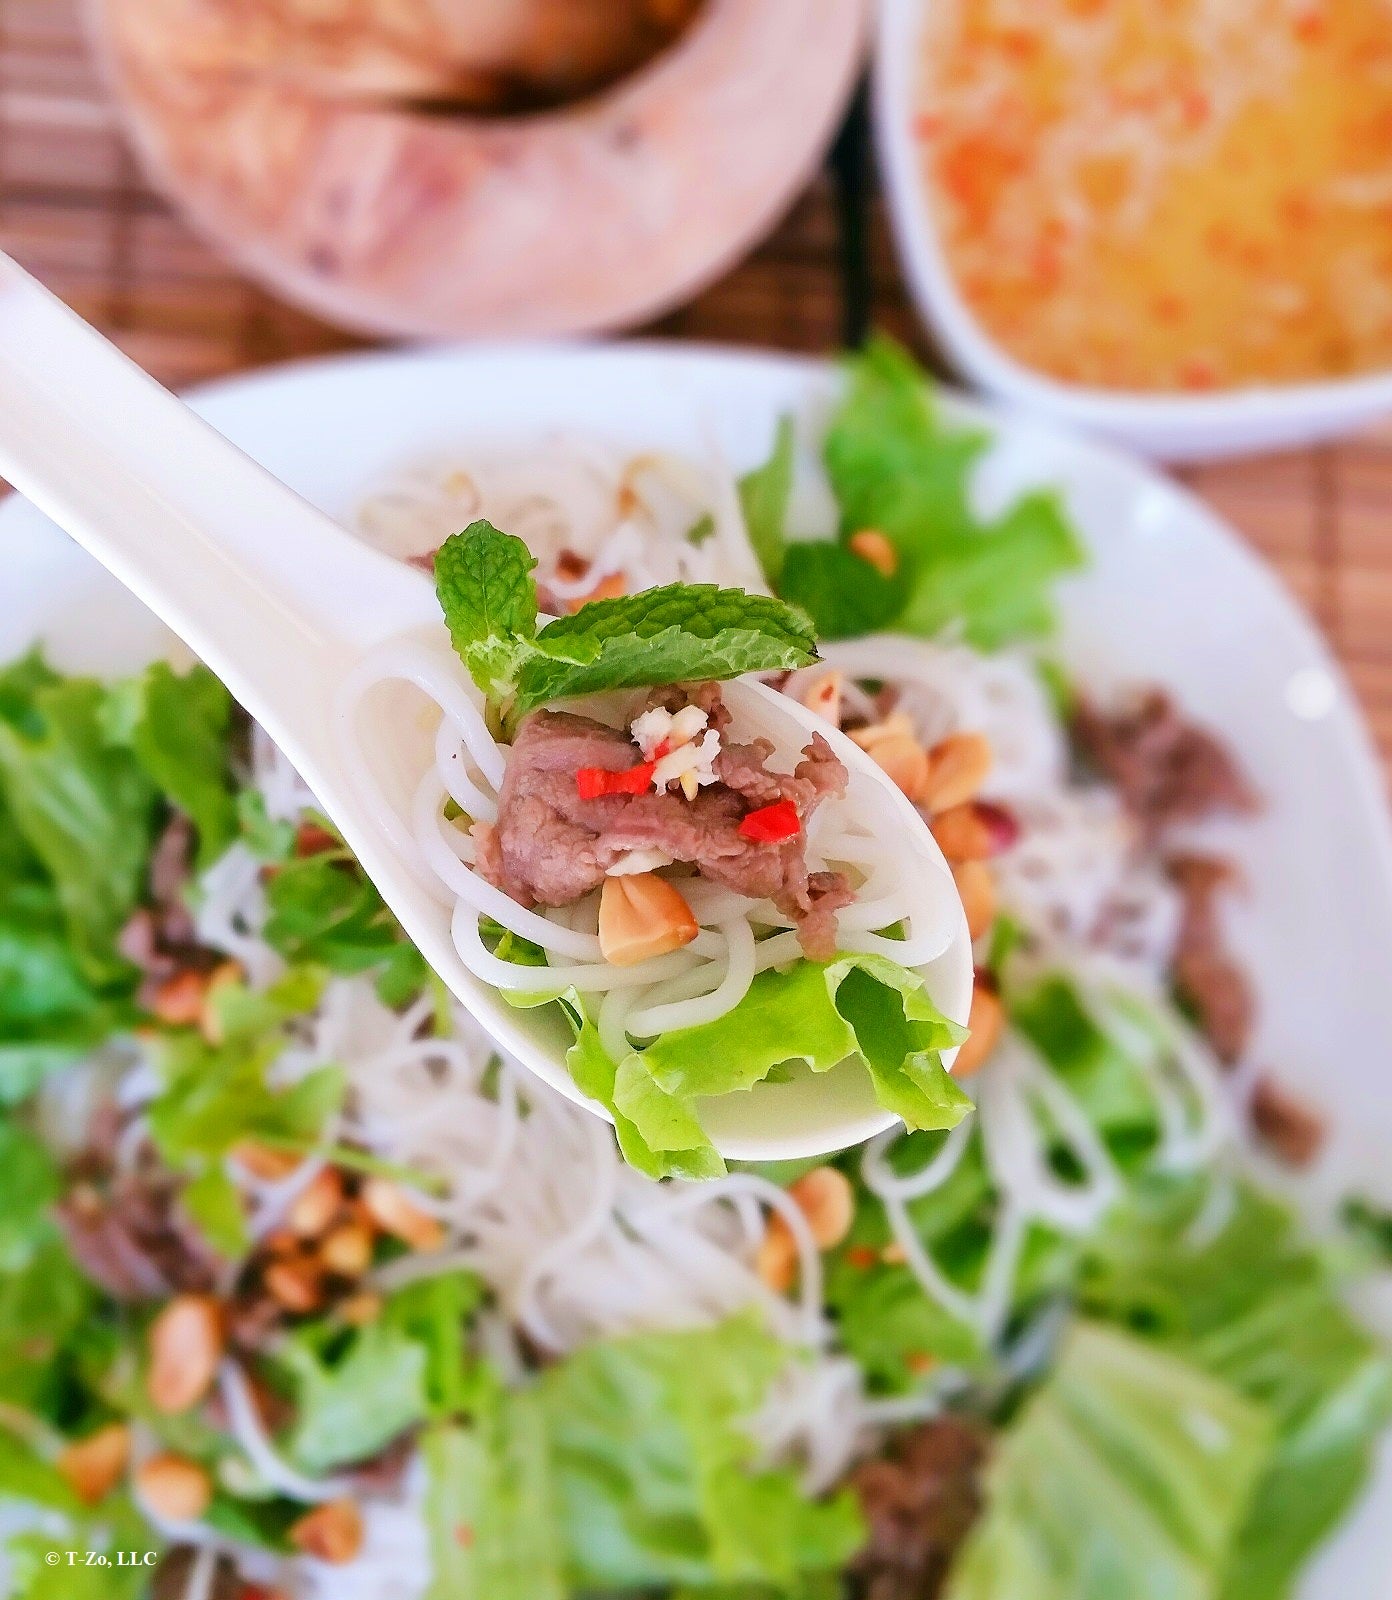 Fresh and delicious T-ZO Stirred-fried beef vermicelli - a Northern Vietnamese style of beef noodles salad